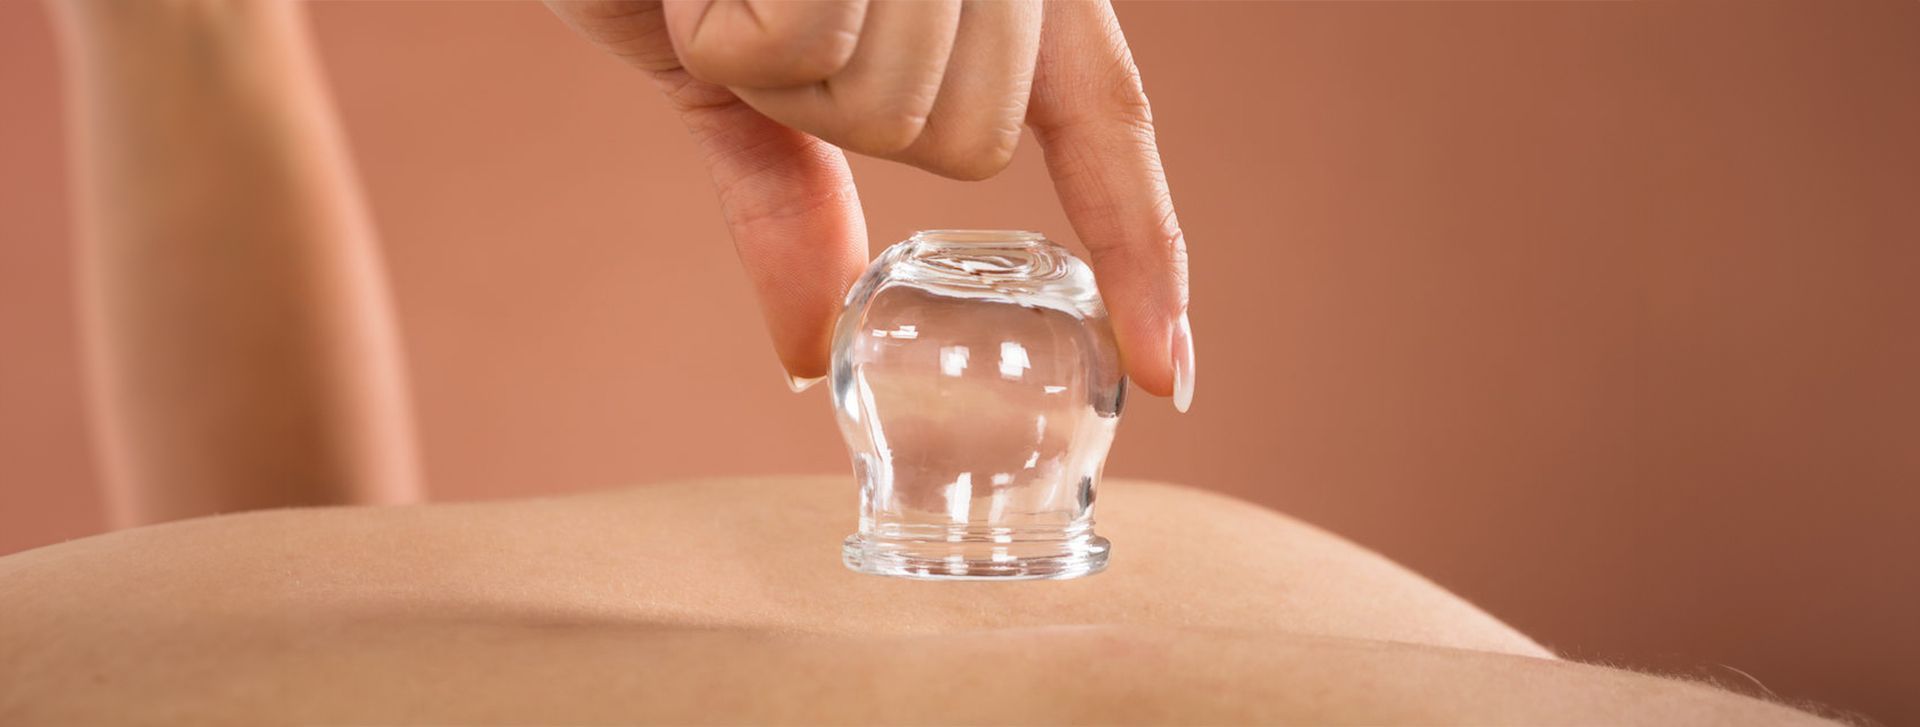 6 Surprising Benefits of Cupping & Scraping